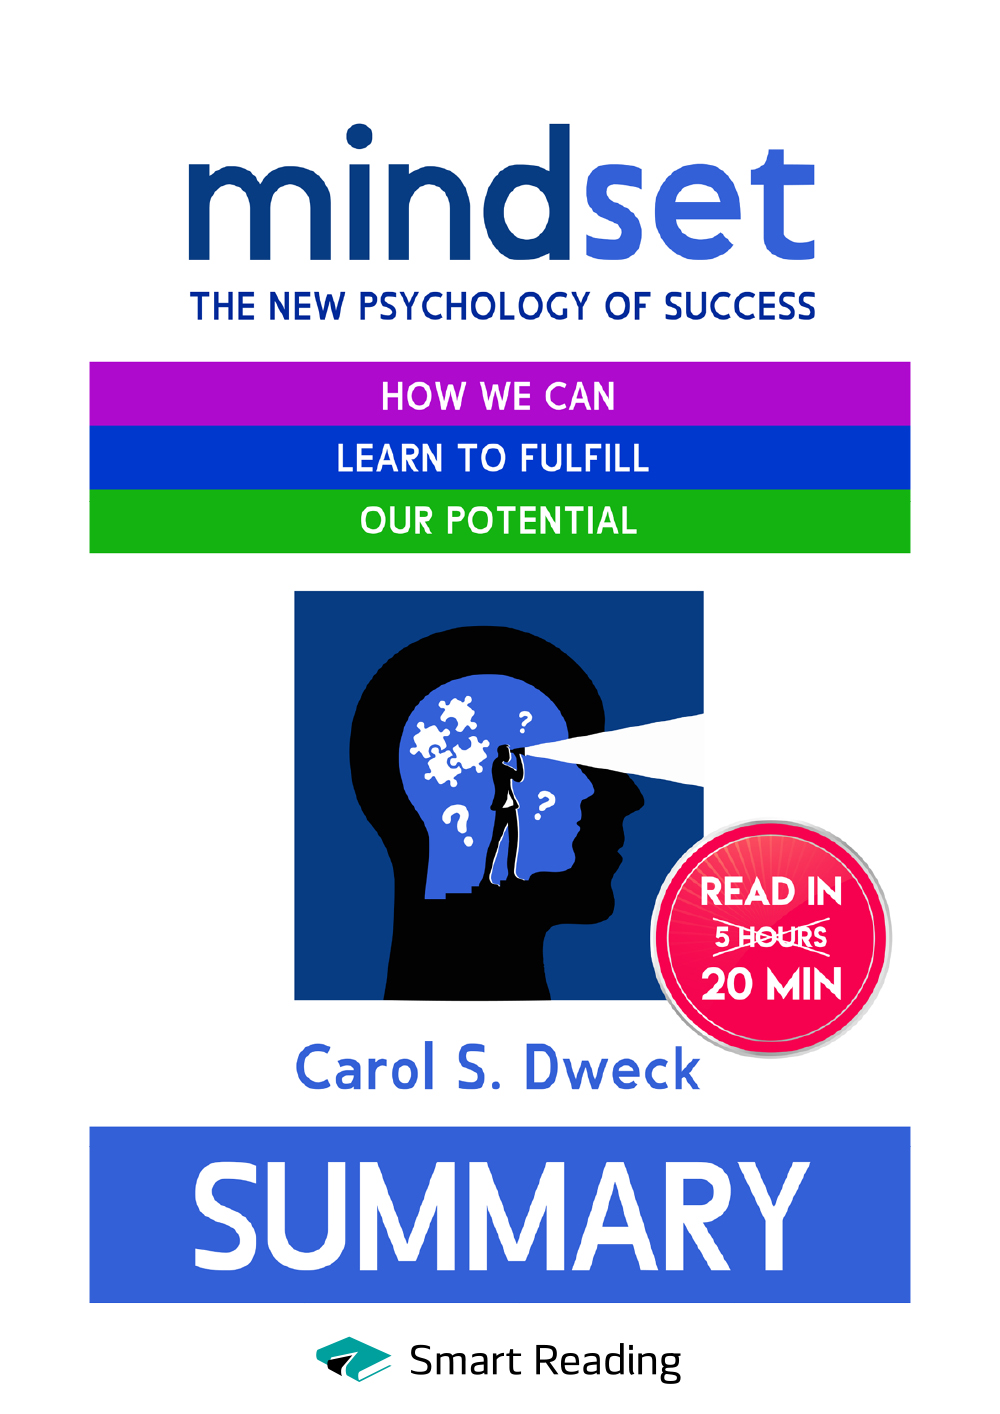 Summary: Mindset. The New Psychology of Success. How we can learn to fulfill our potential. Carol S. Dweck